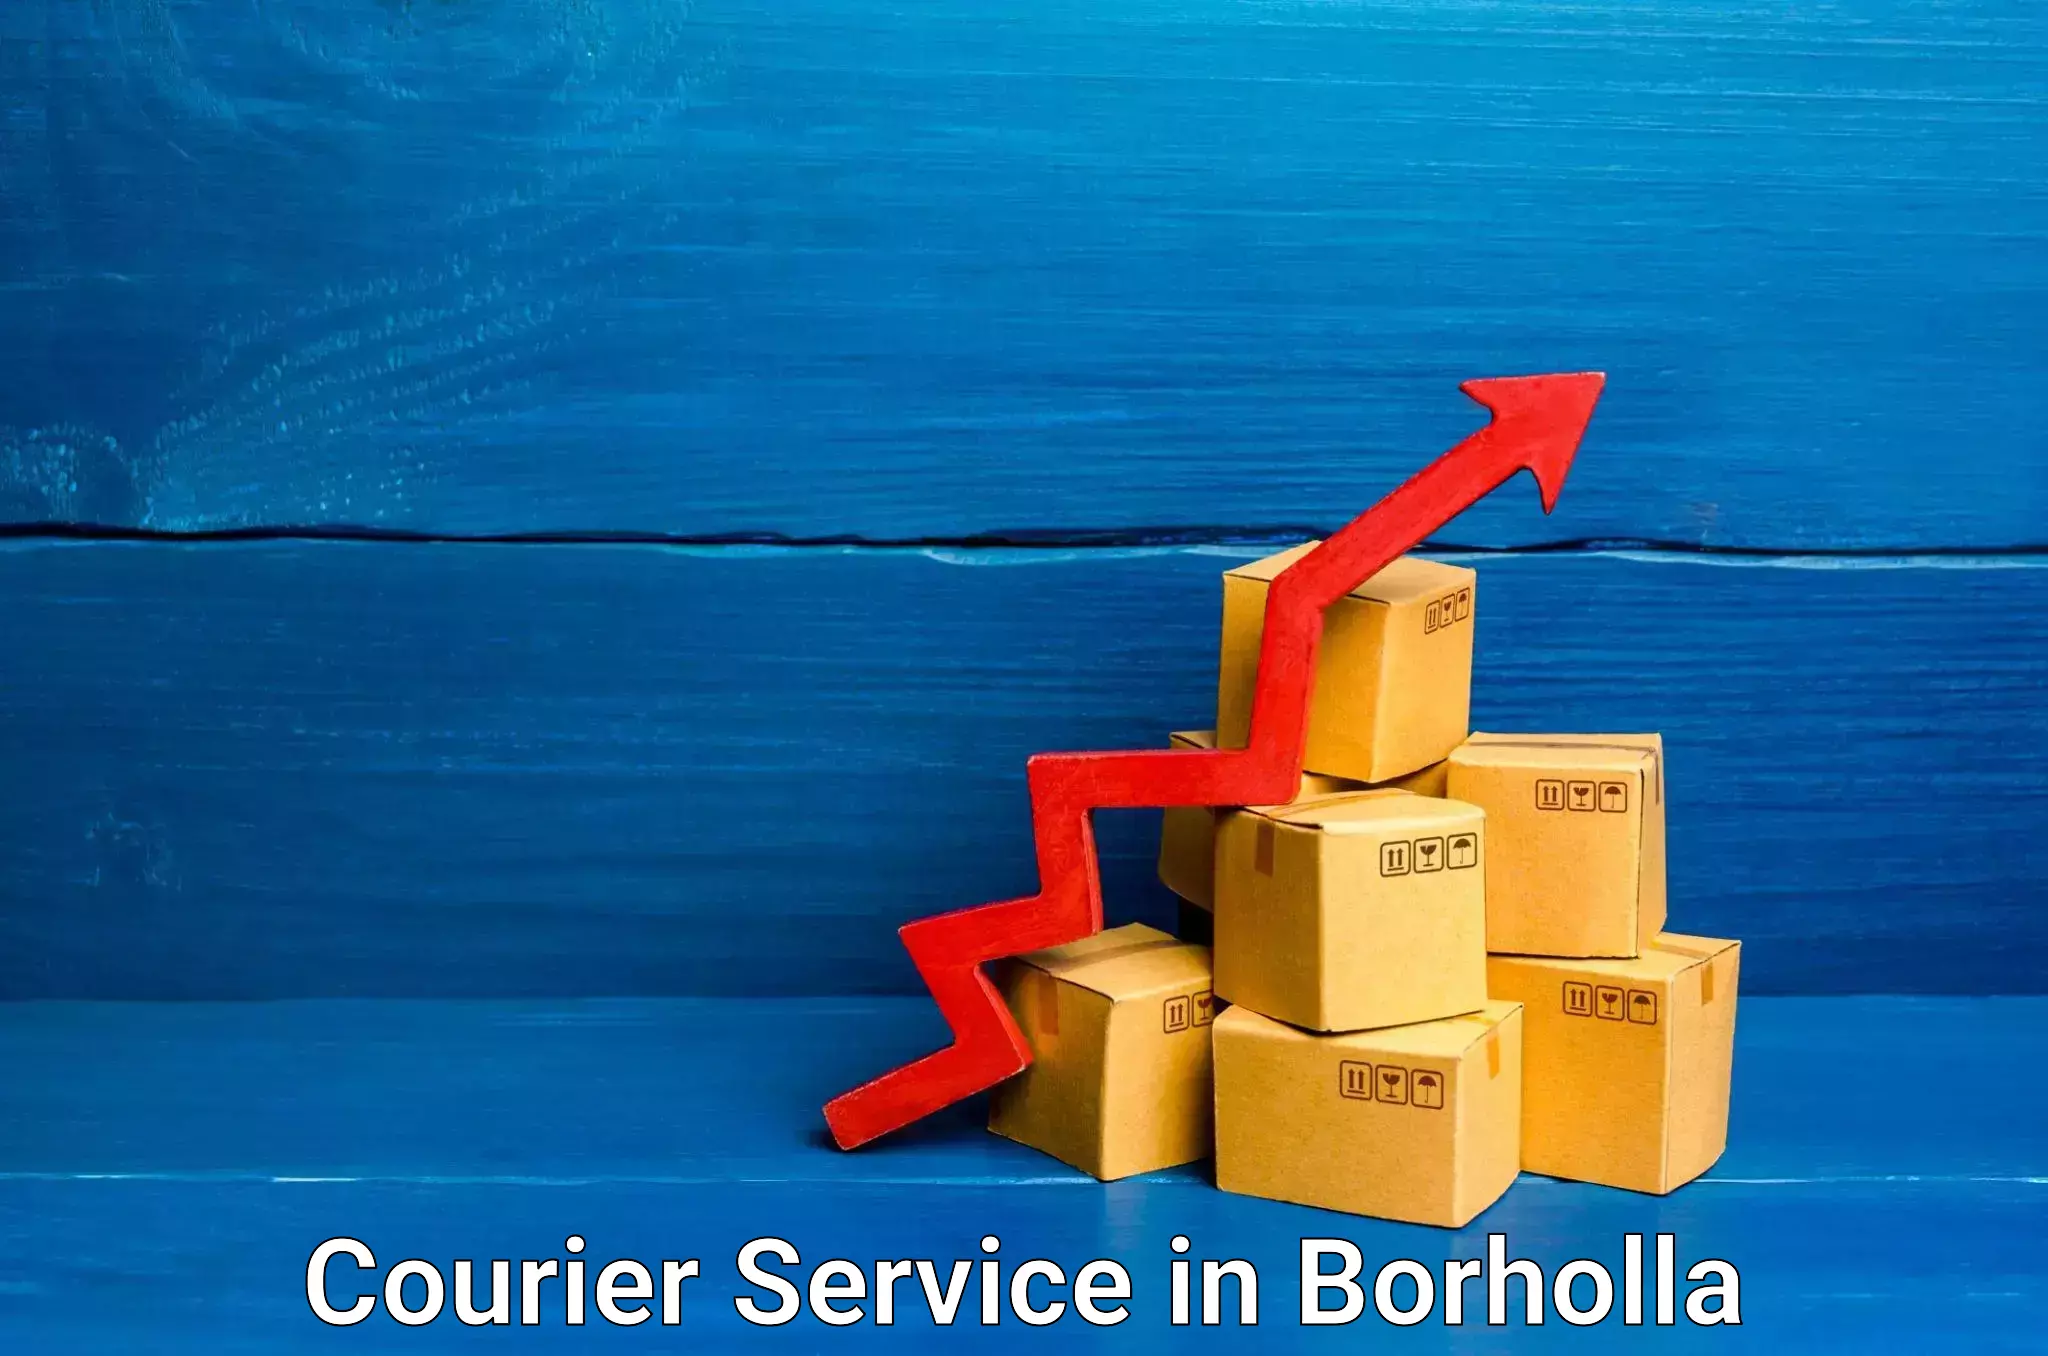 Supply chain delivery in Borholla